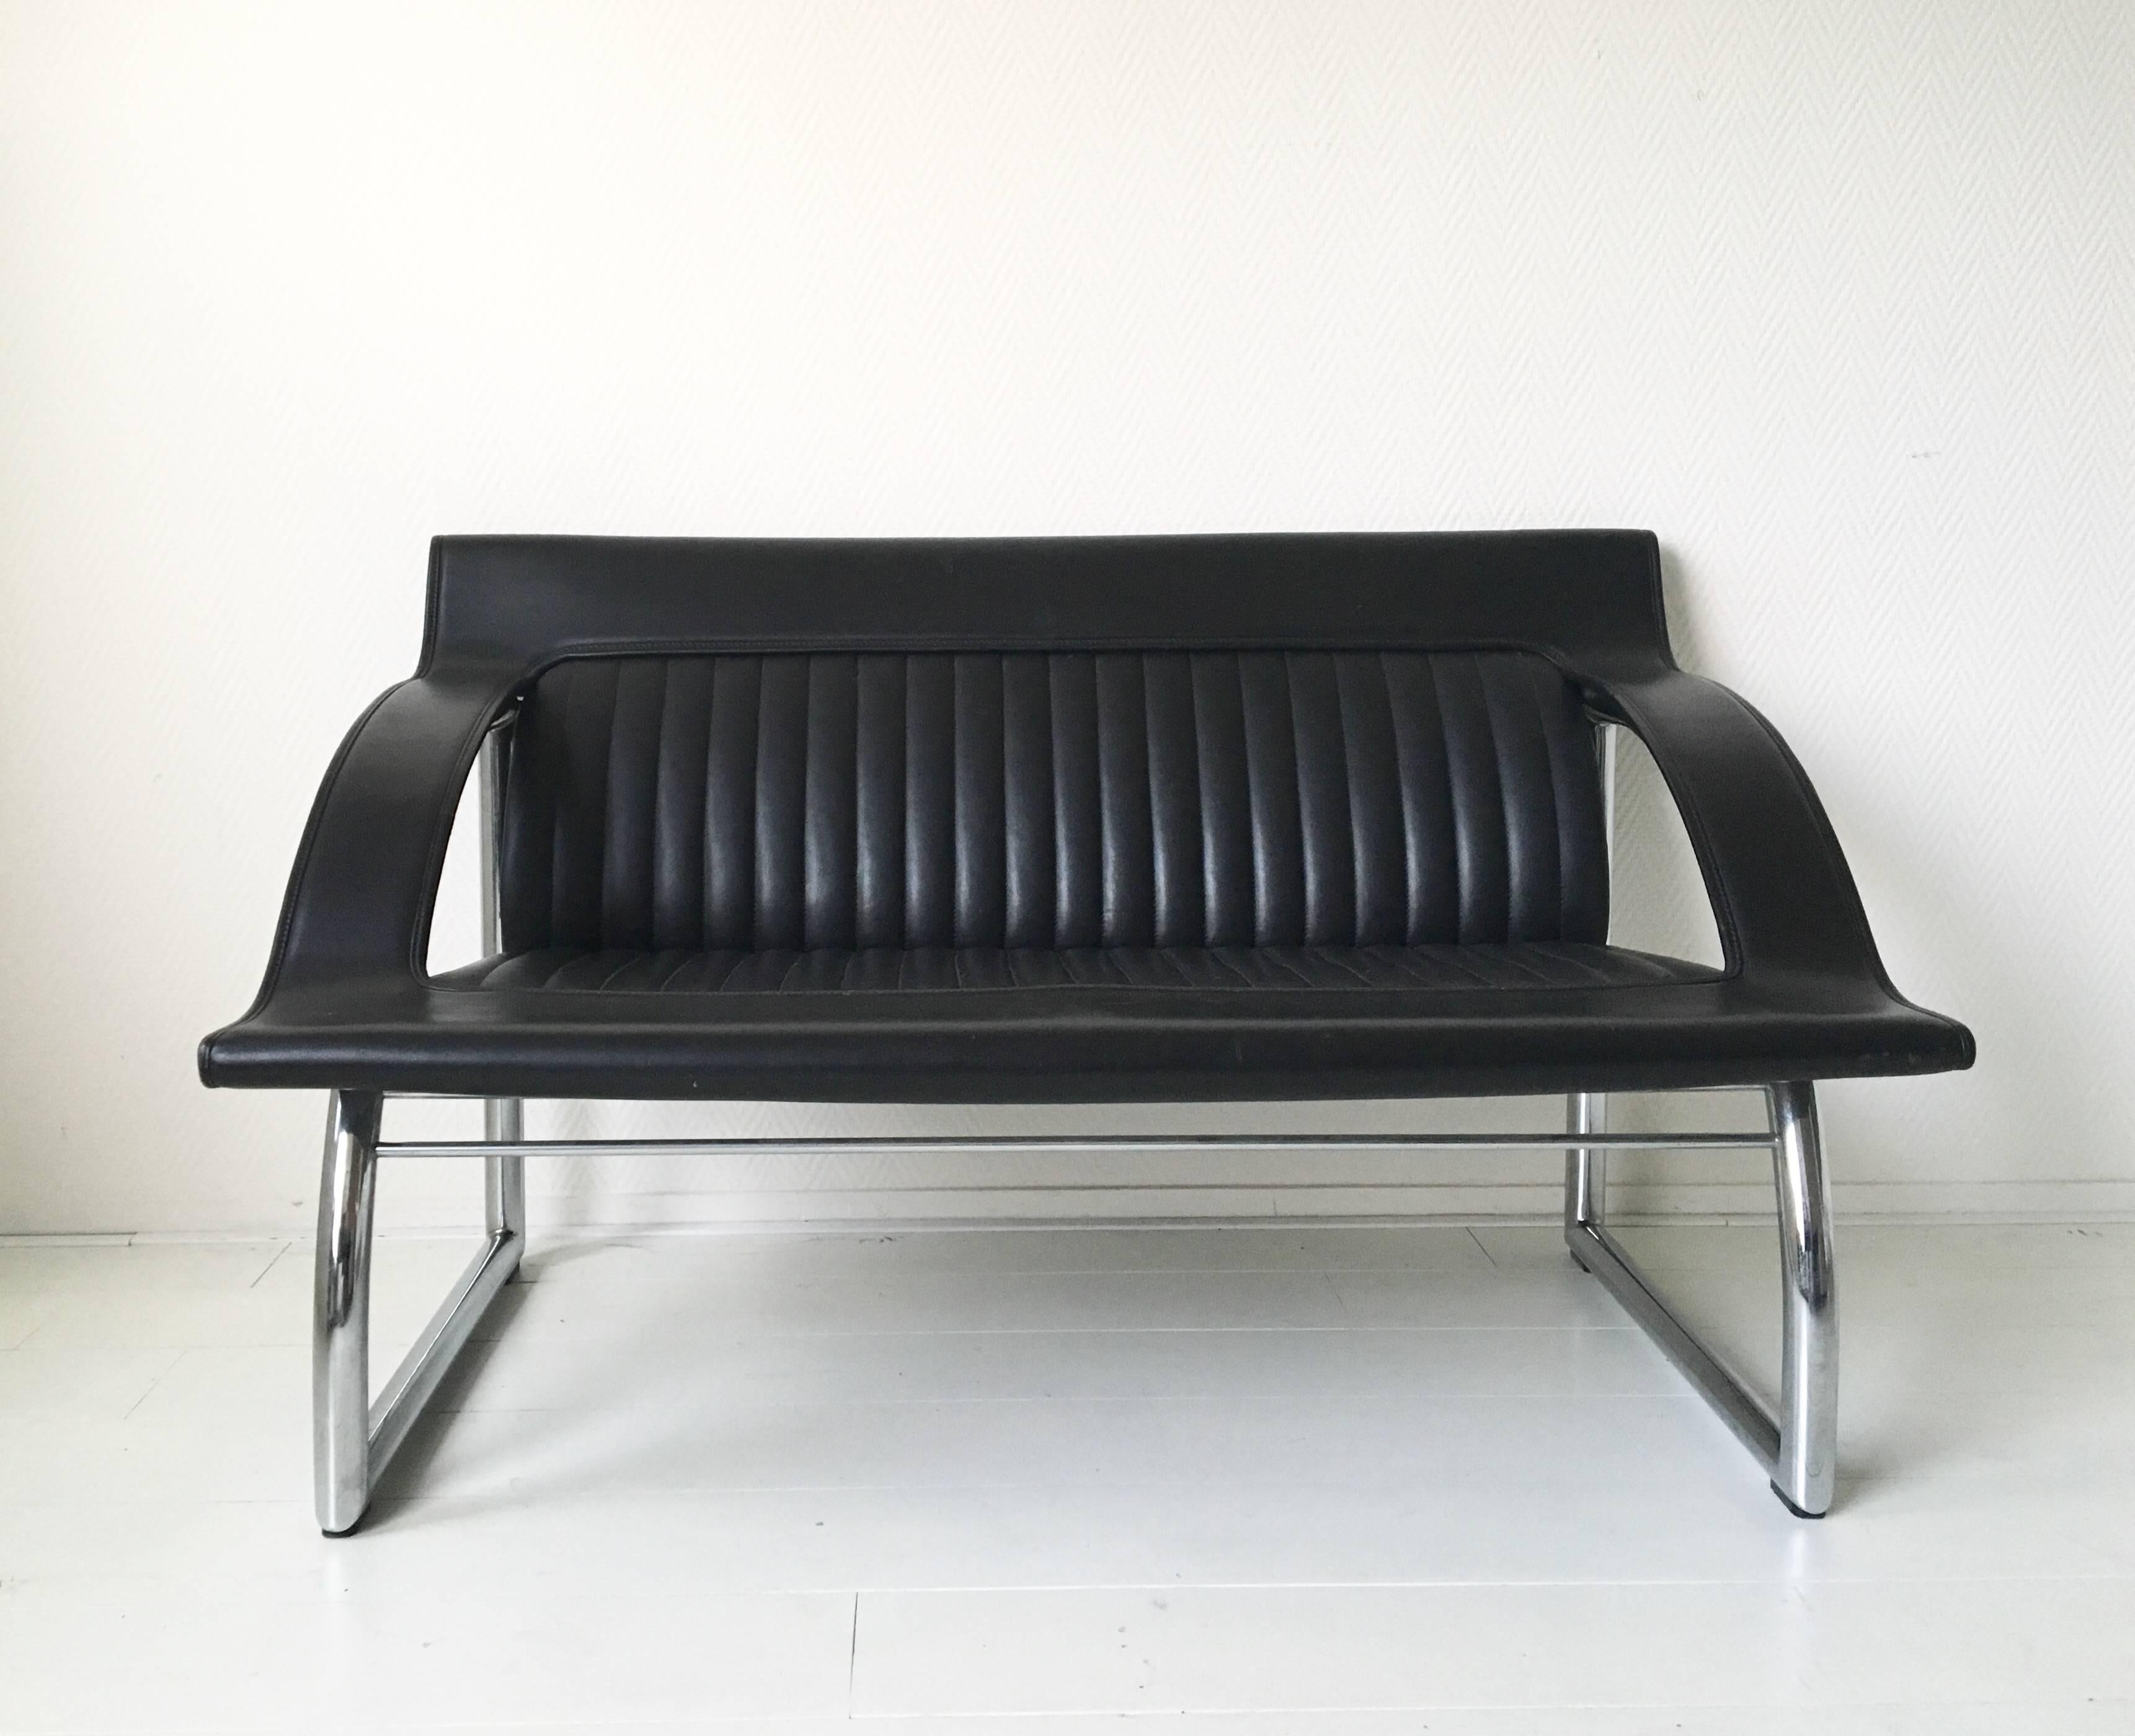 This absolute stunning set was designed by Gerd Lange for De Sede Switzerland, circa 1985. It consists of a two-seat sofa and a lounge chair with thick black leather upholstery and a chromed tubular base. This set has not been in production anymore